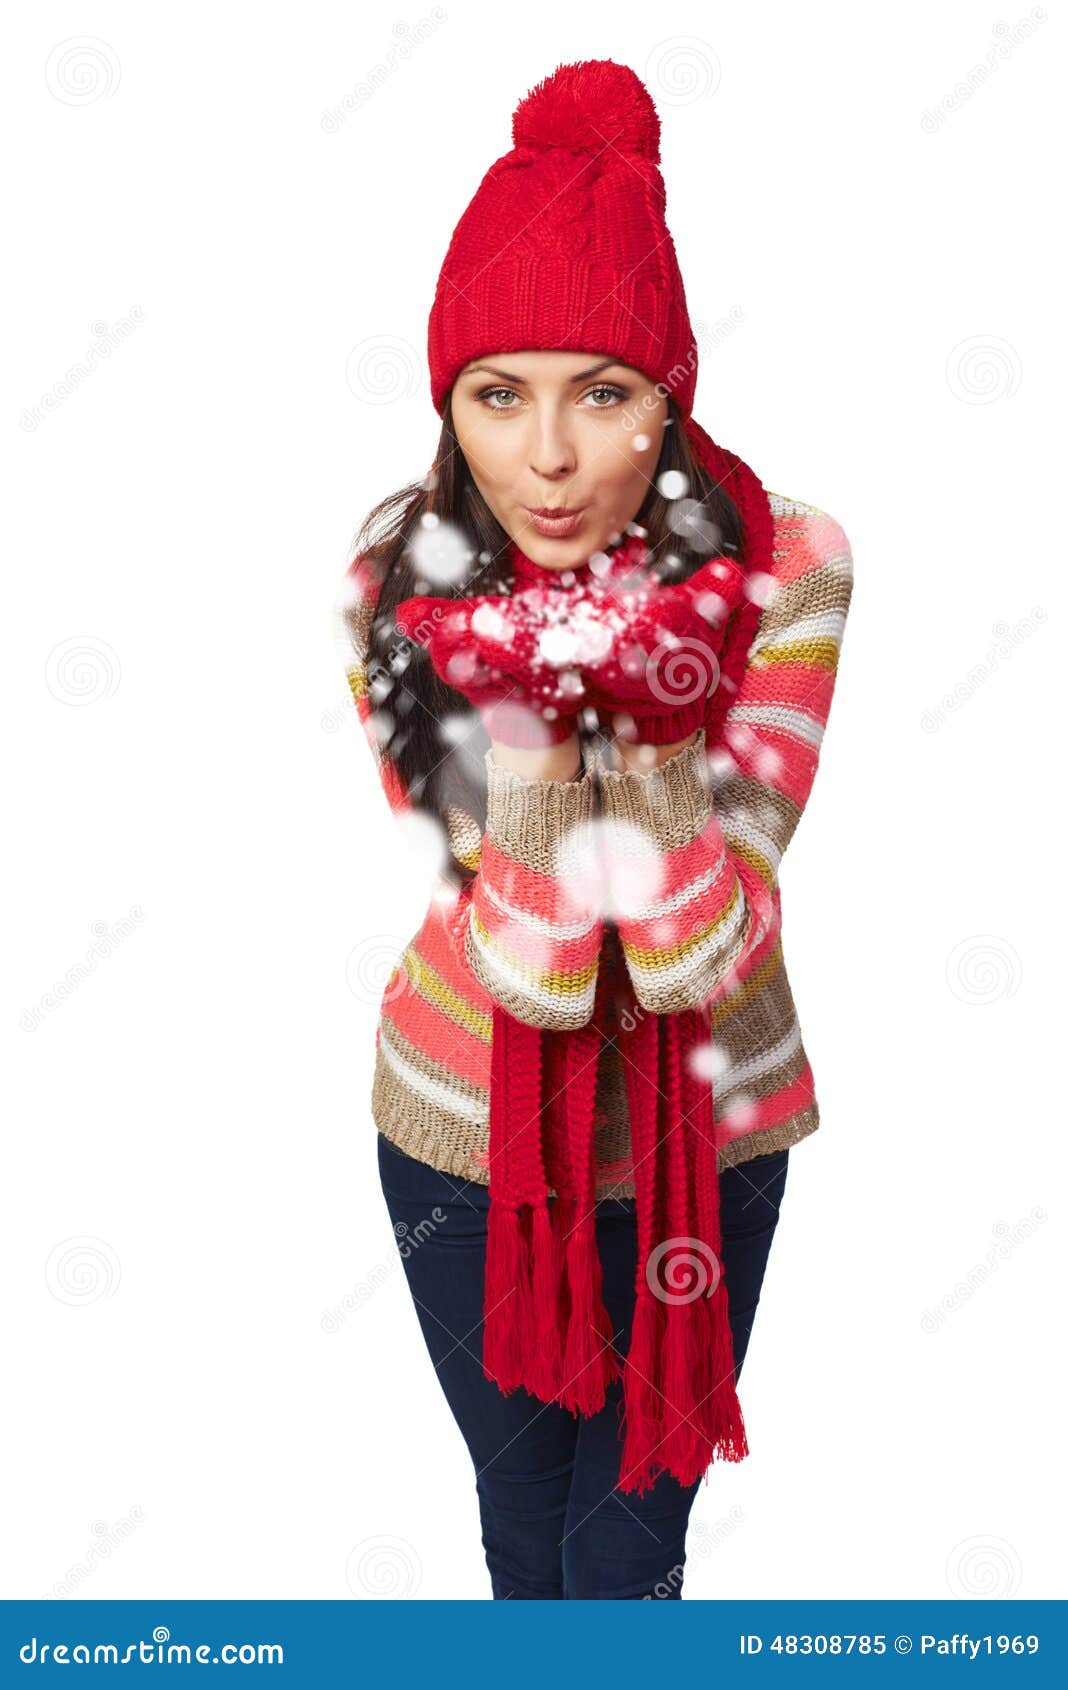 Red scarf girl